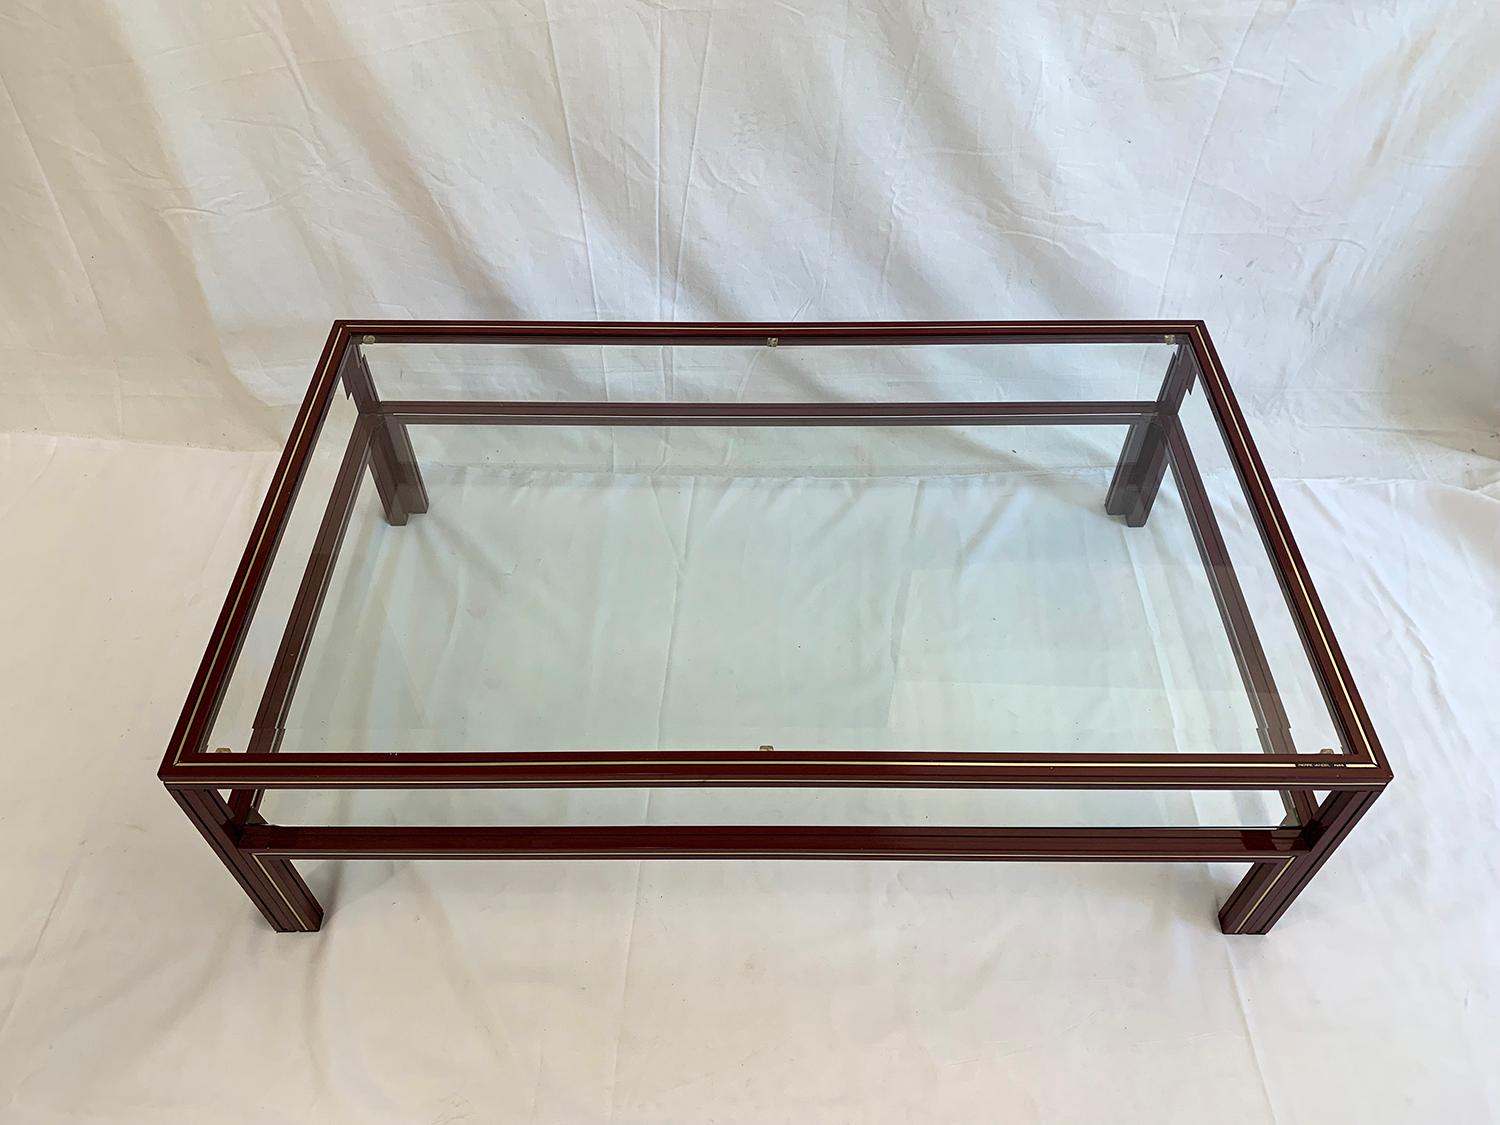 Very nice coffee table with two levels designed by Pierre Vandel, 1970s. The painted metal structure in beautiful red burgundy offers two clear glass trays one of which is beveled. The table is in very good condition.

Très belle table basse à